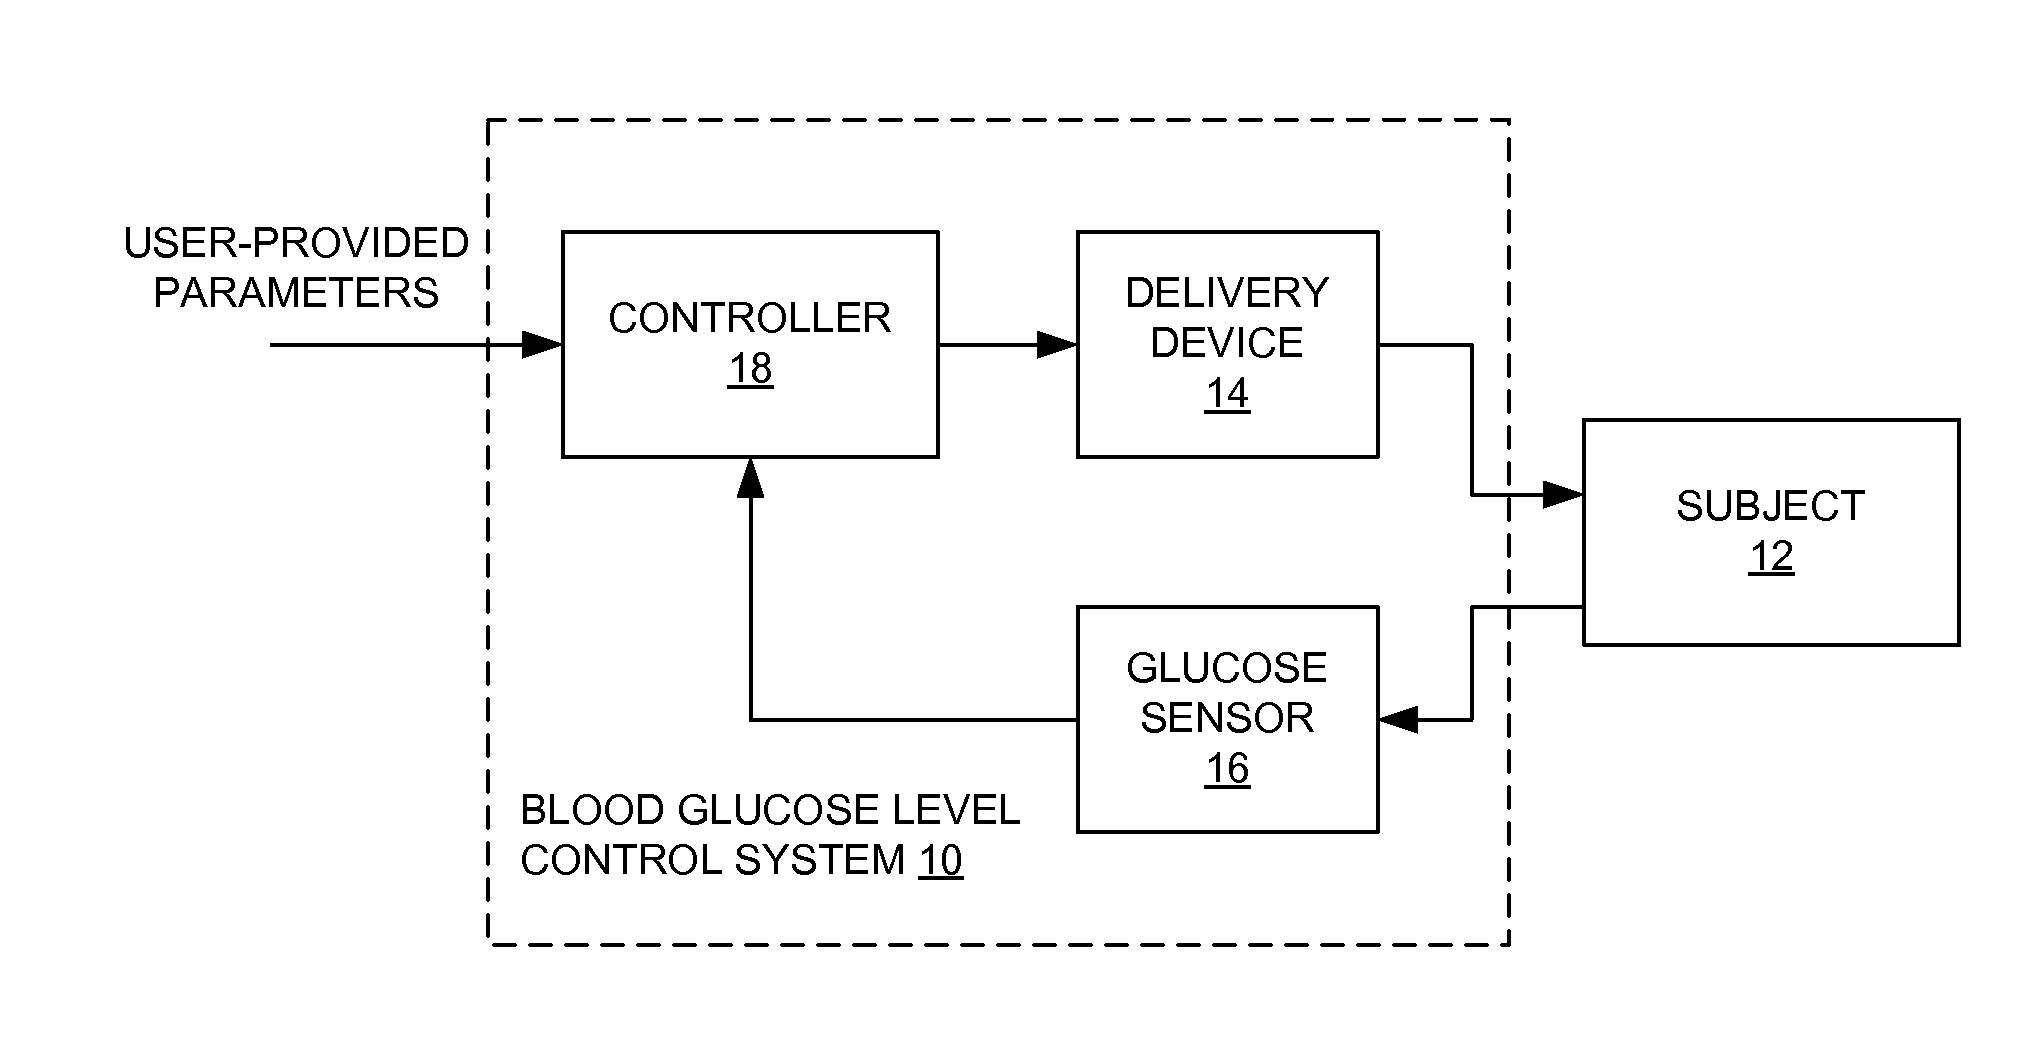 Fully automated control system for type 1 diabetes